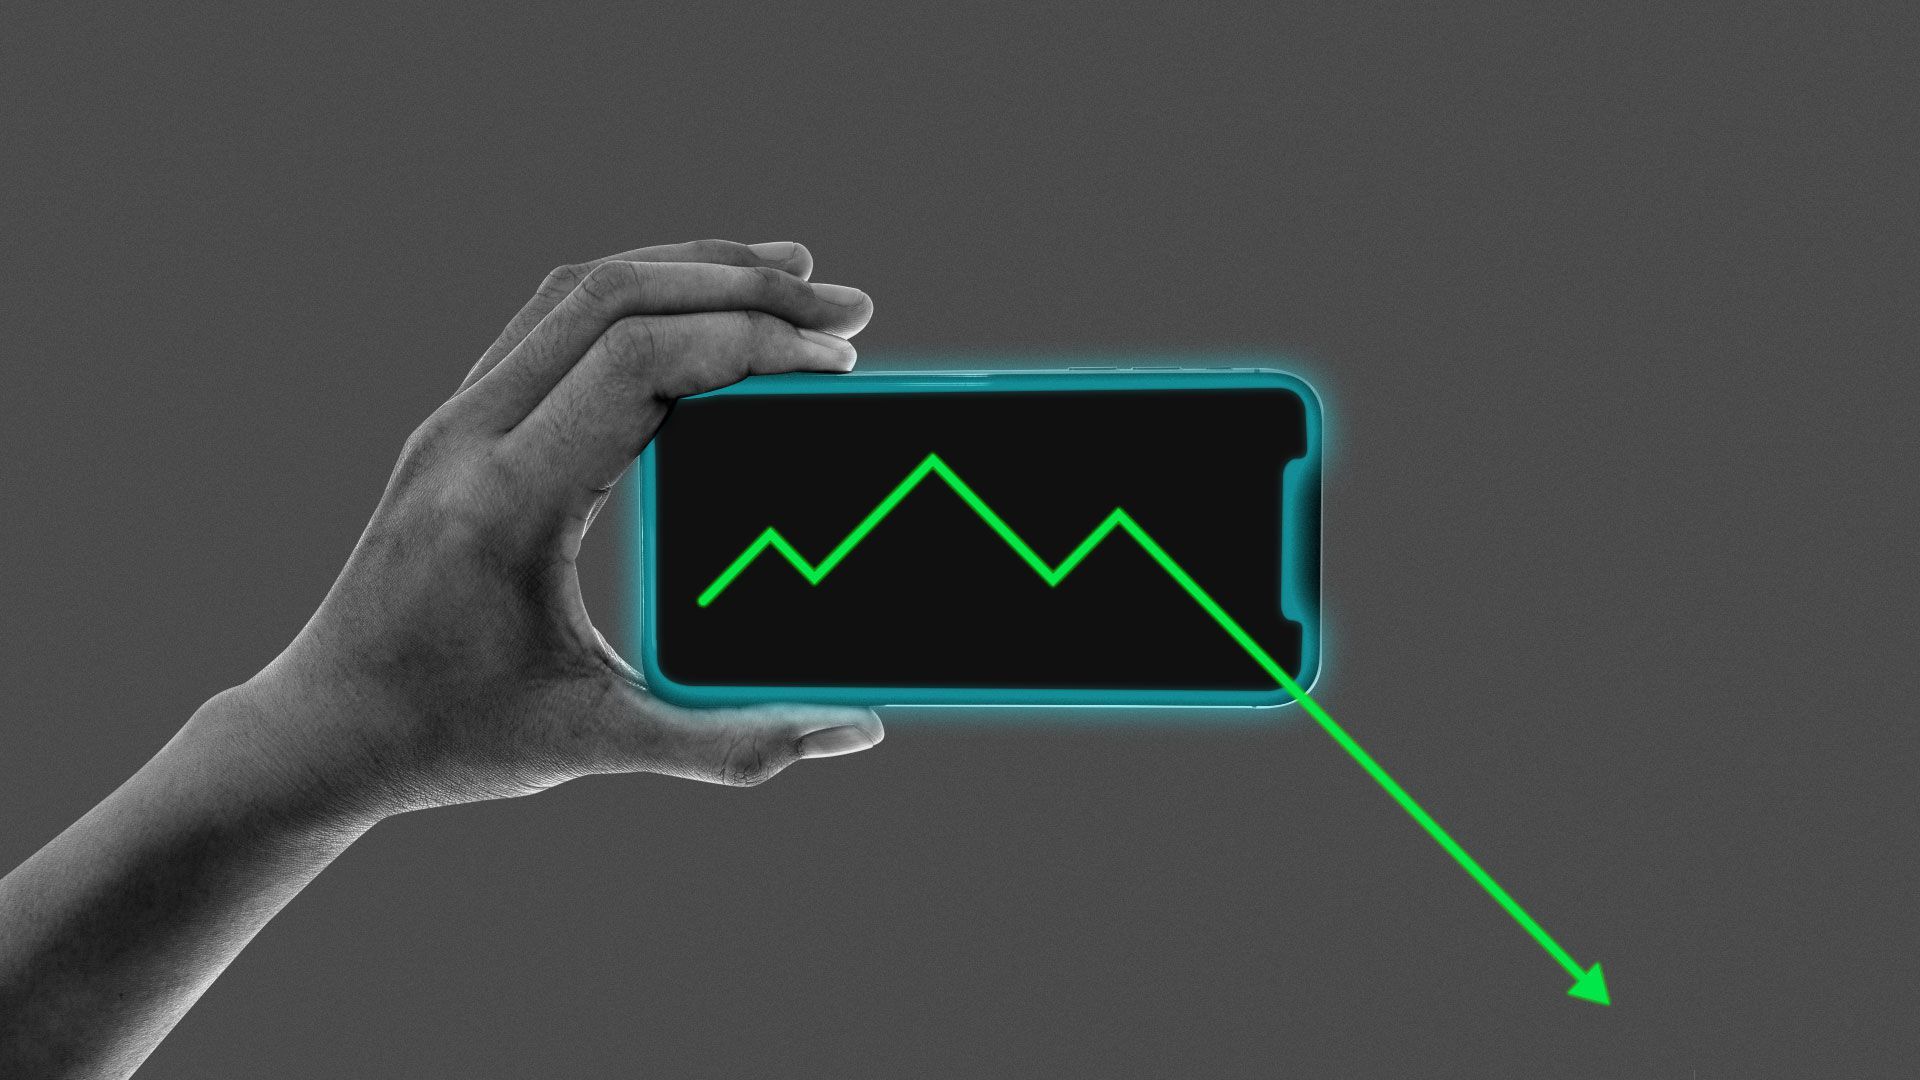 Illustration of person holding a smartphone with a downward trending line graph